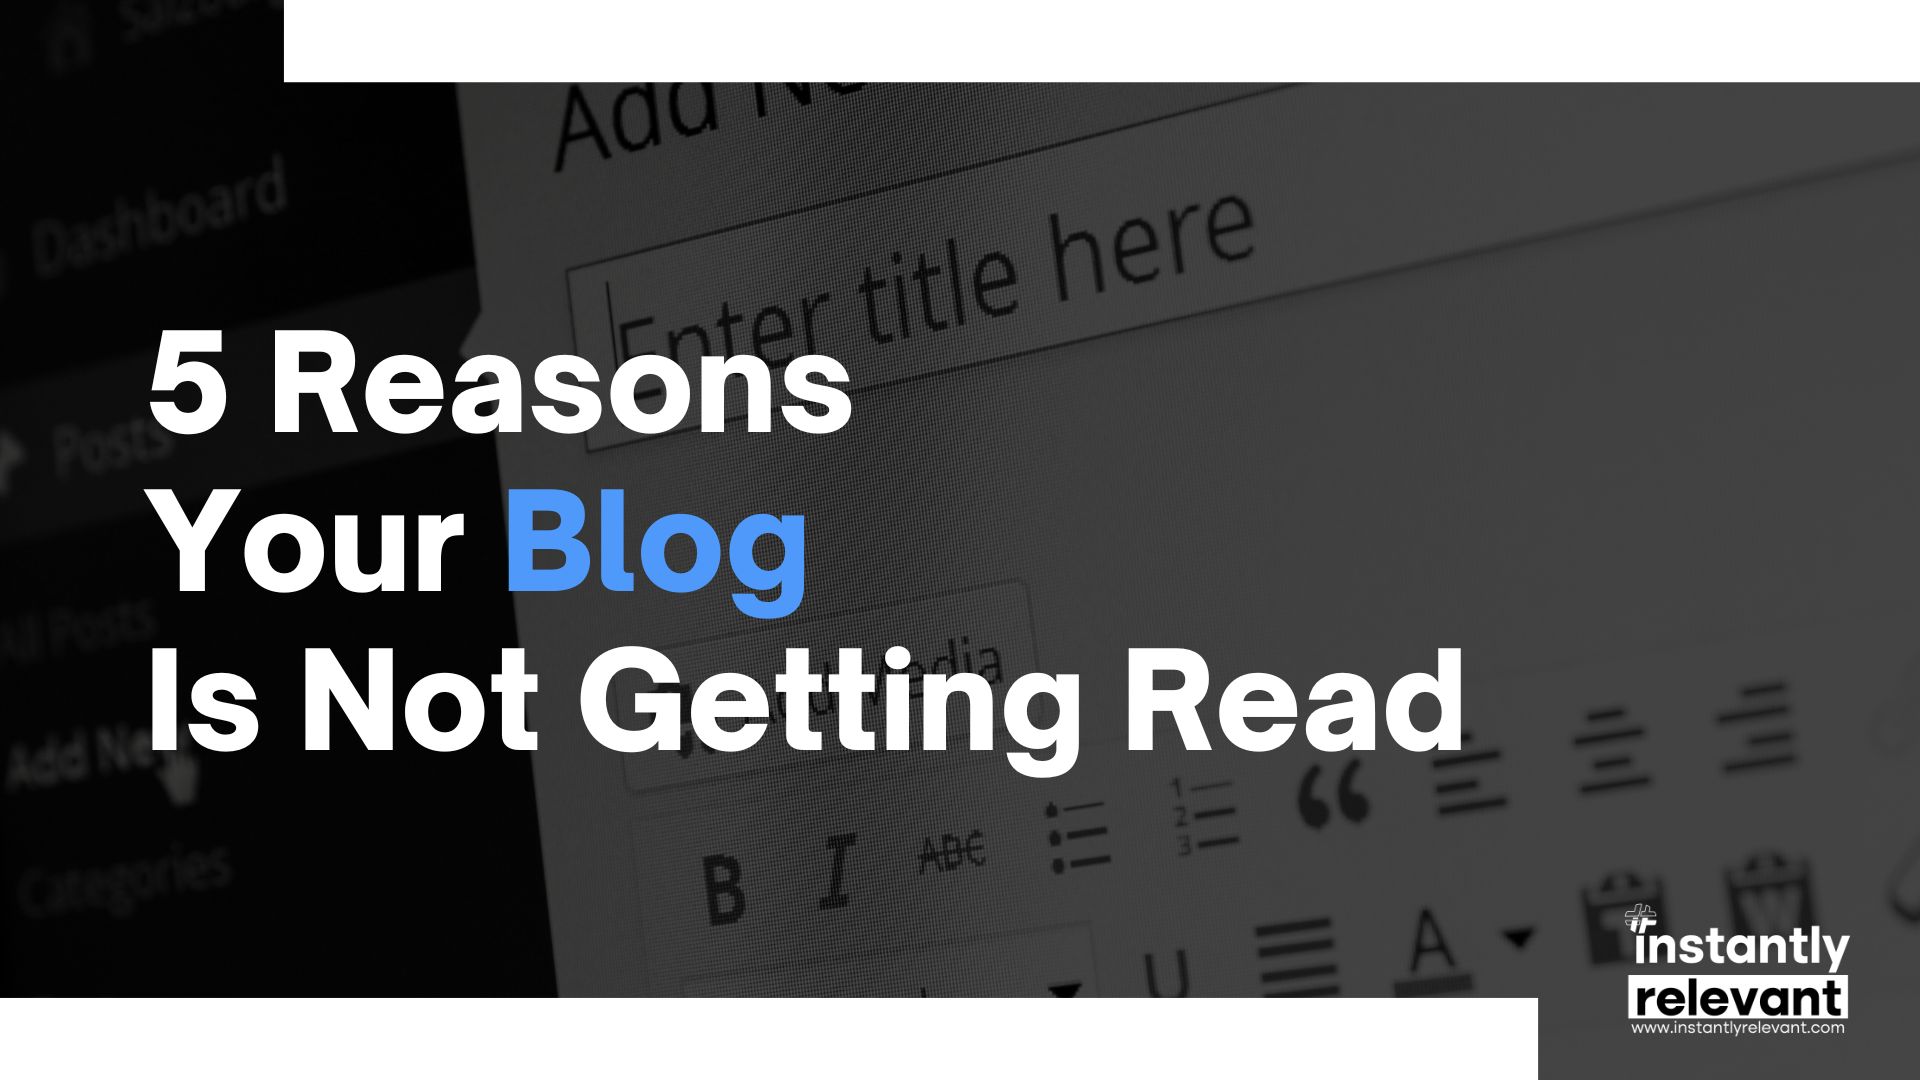 5 Reasons Your Blog Is Not Getting Read